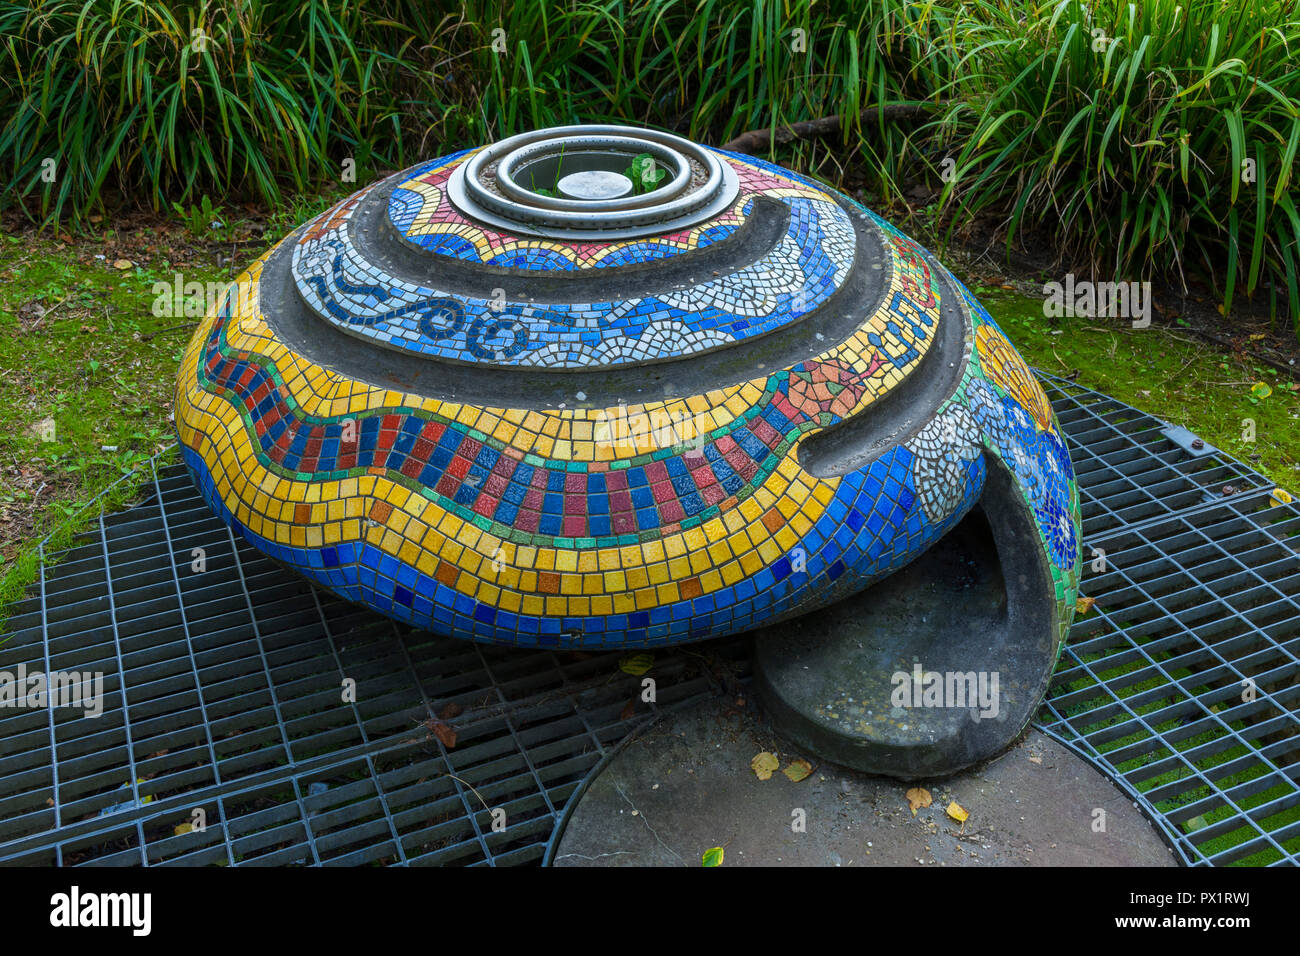 Shell sculpture with mosaics (details not known), Hulme Park, Manchester, UK Stock Photo